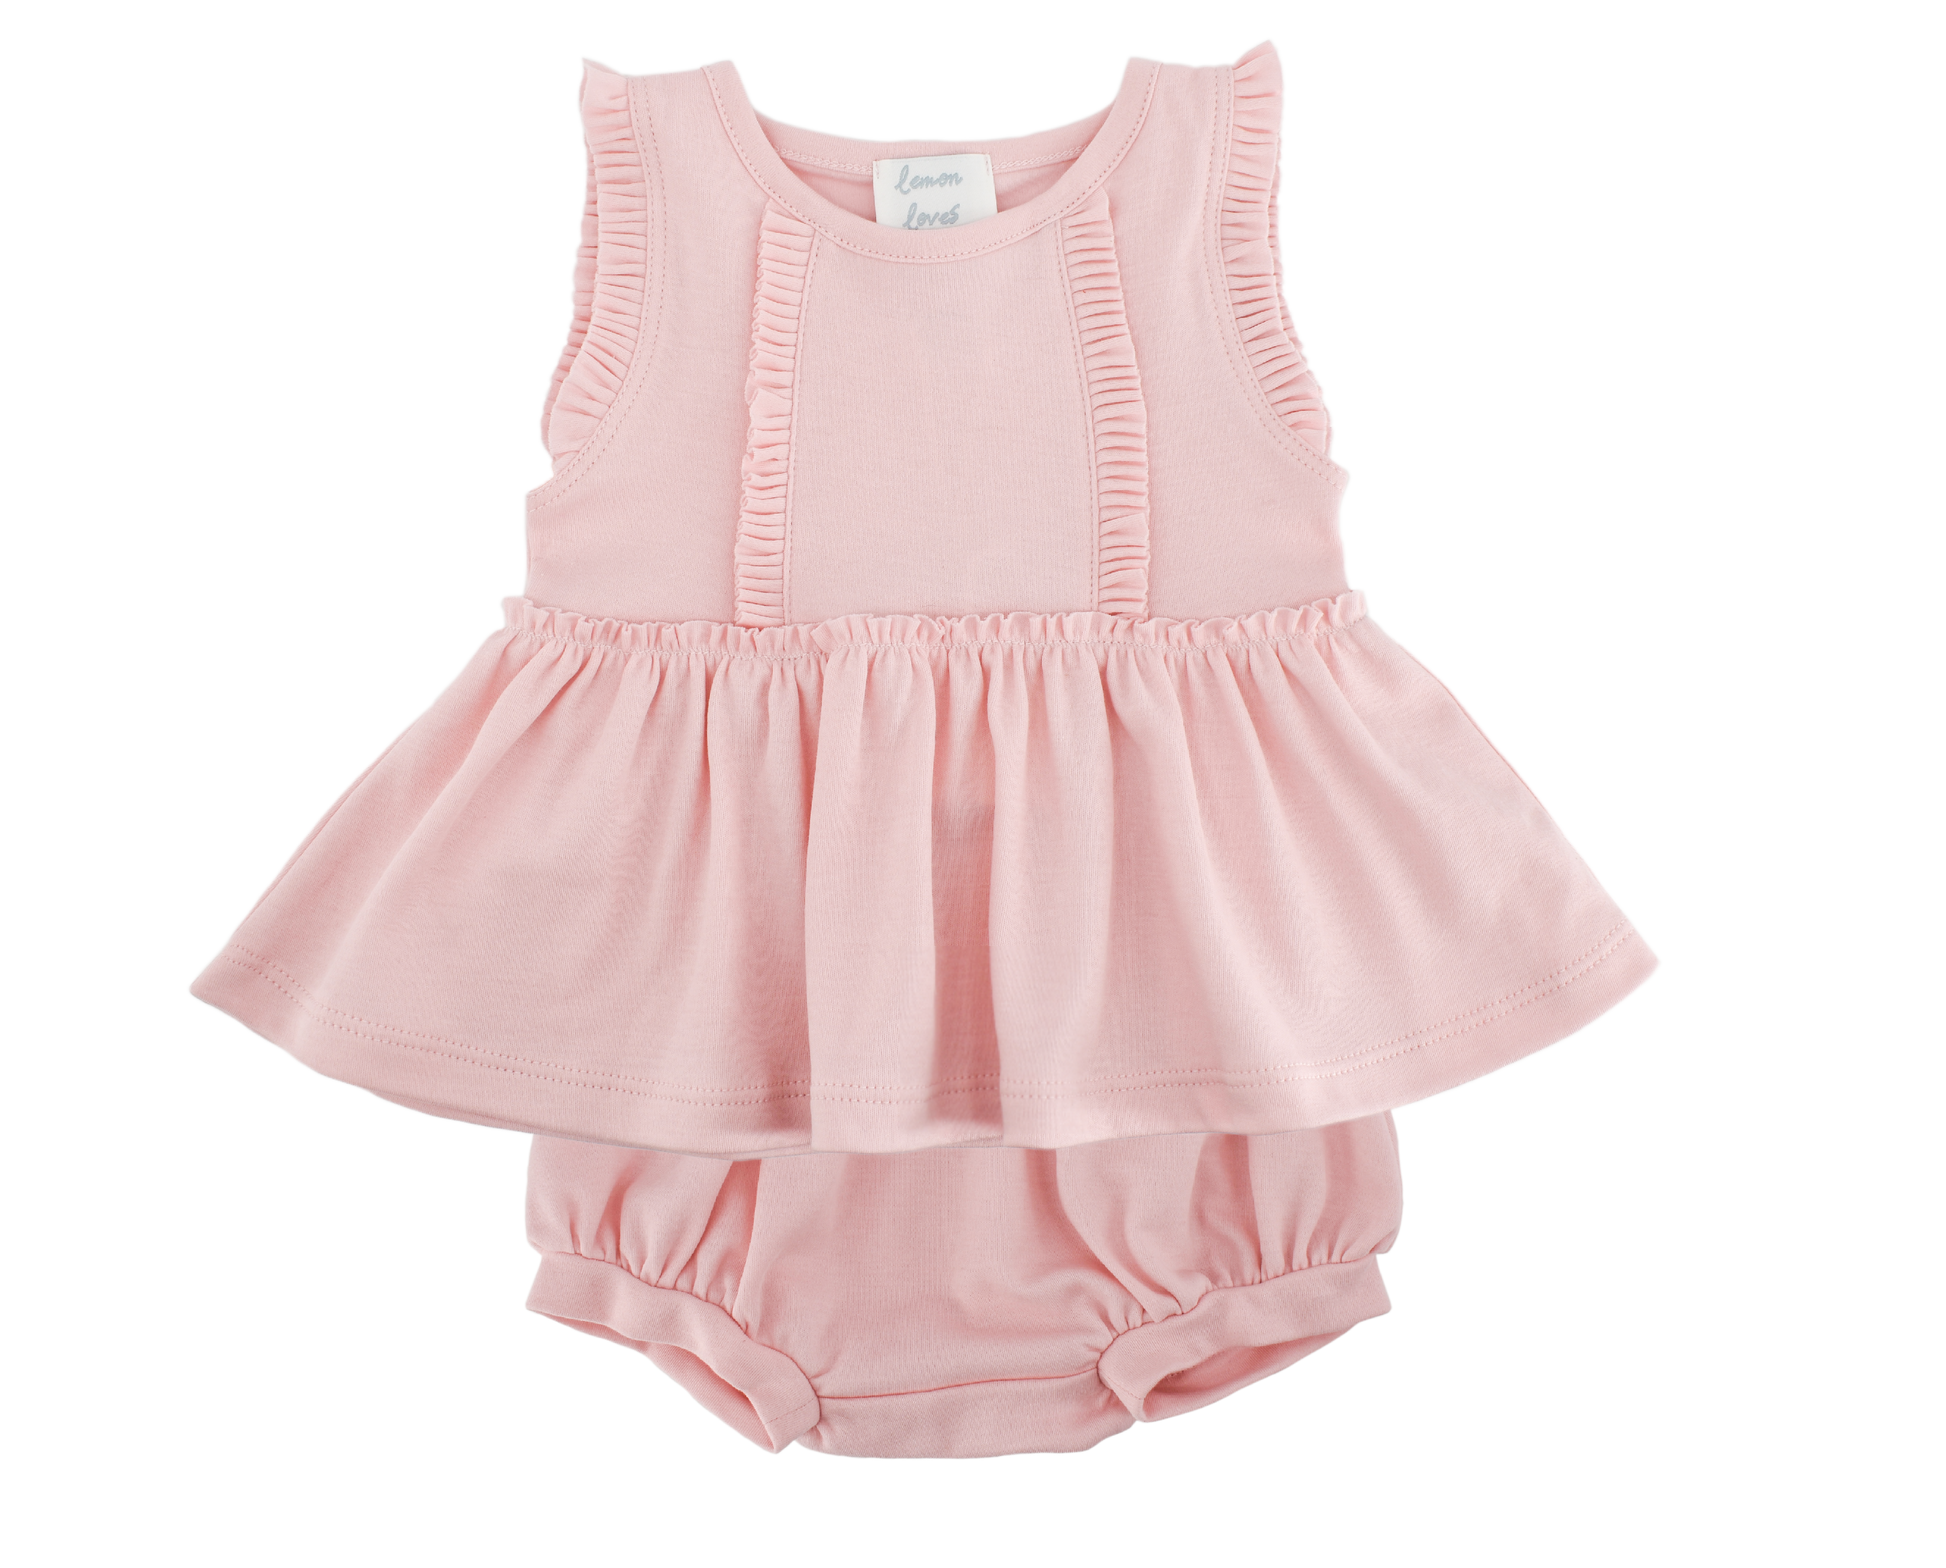 Daisy Dress Set in Rose Shadow  - Doodlebug's Children's Boutique